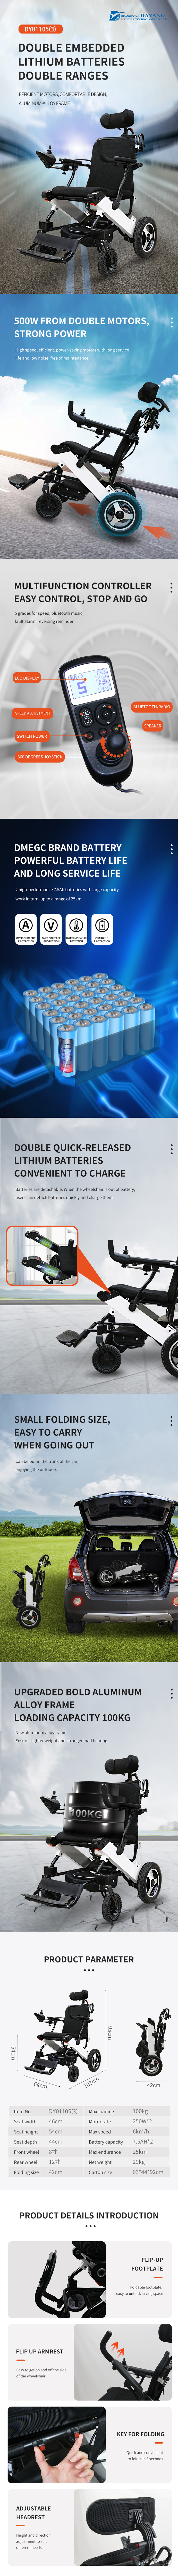 training foldable power wheelchair for disabled